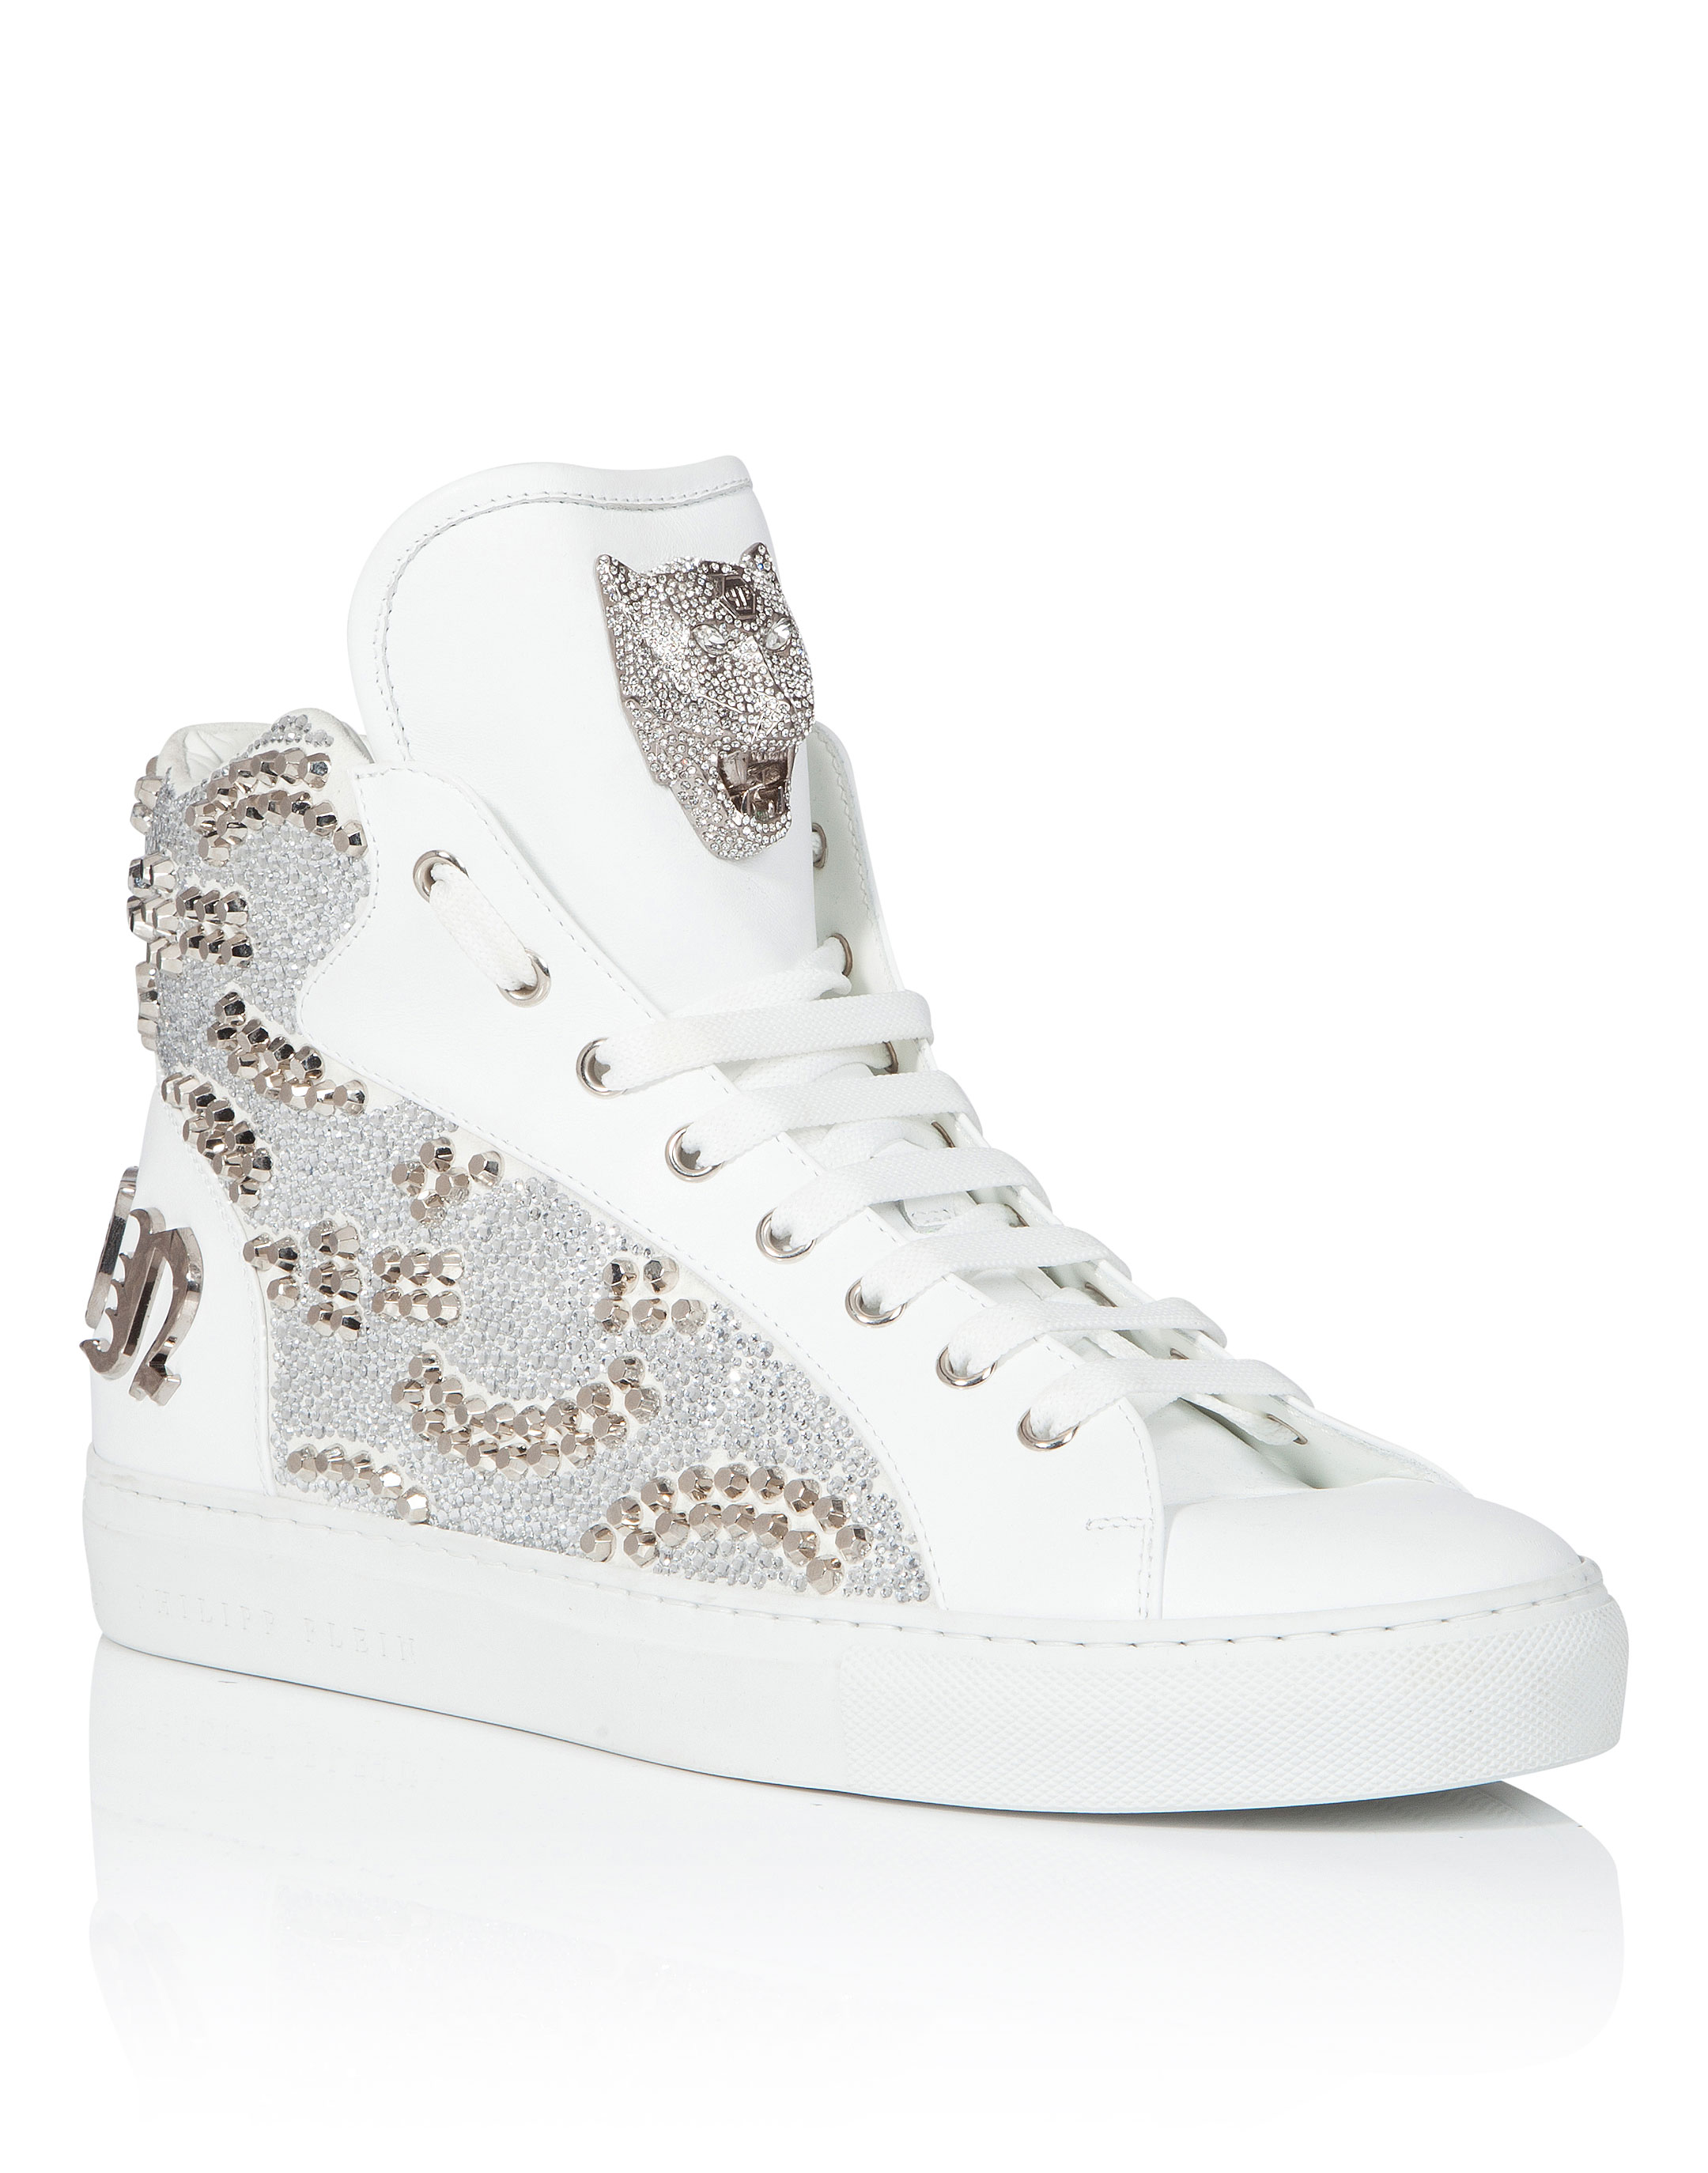 Hi-Top Sneakers "Shiny studs" | Philipp Plein Outlet